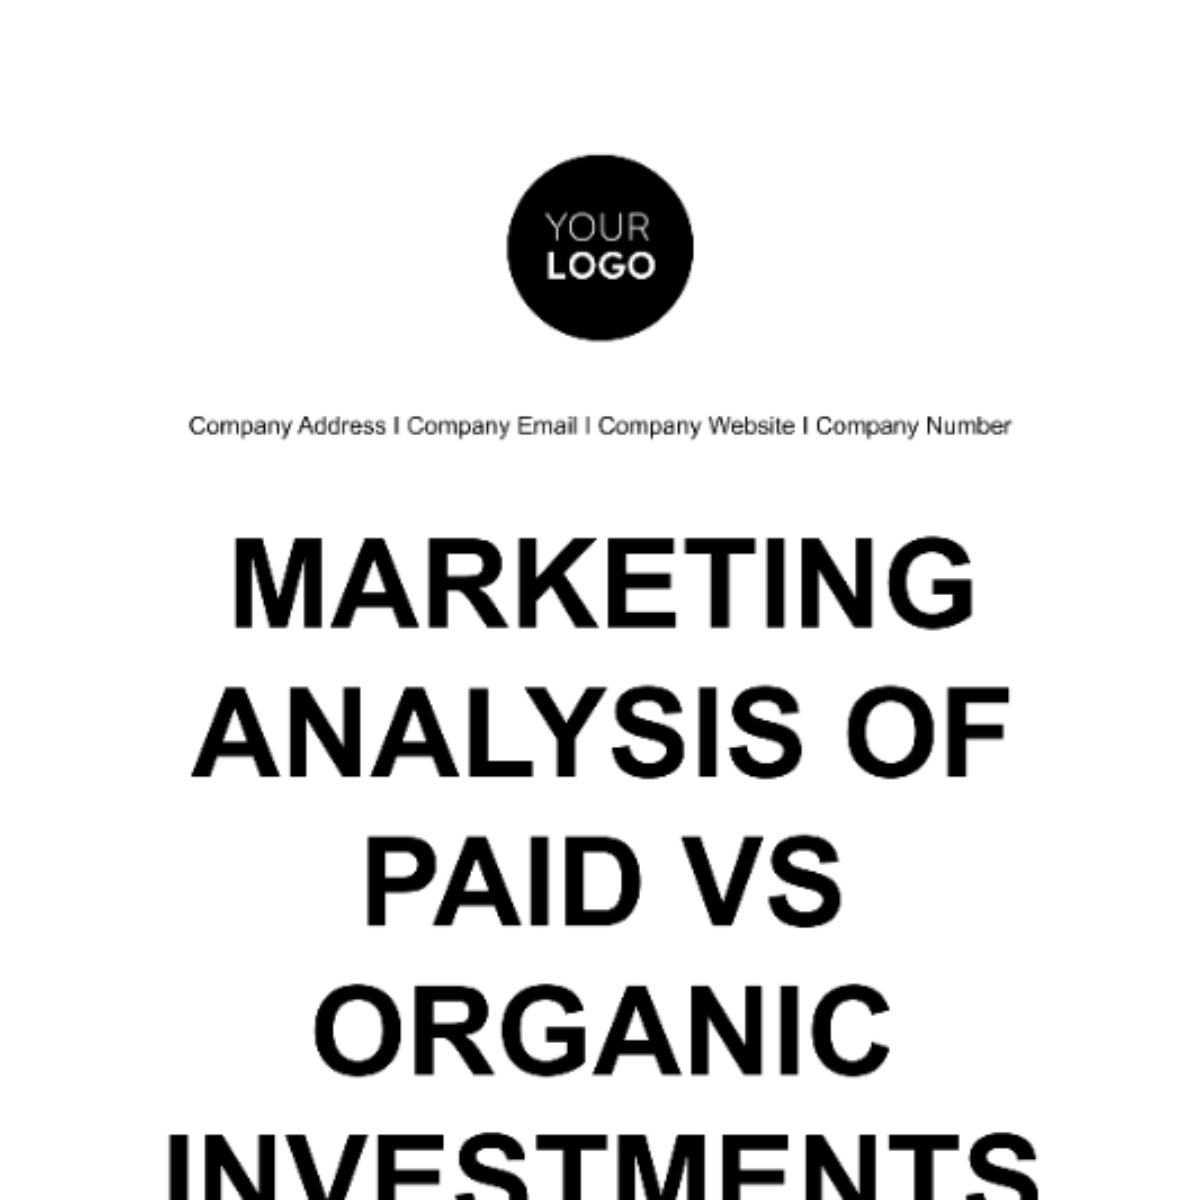 Free Marketing Analysis of Paid vs Organic Investments Template